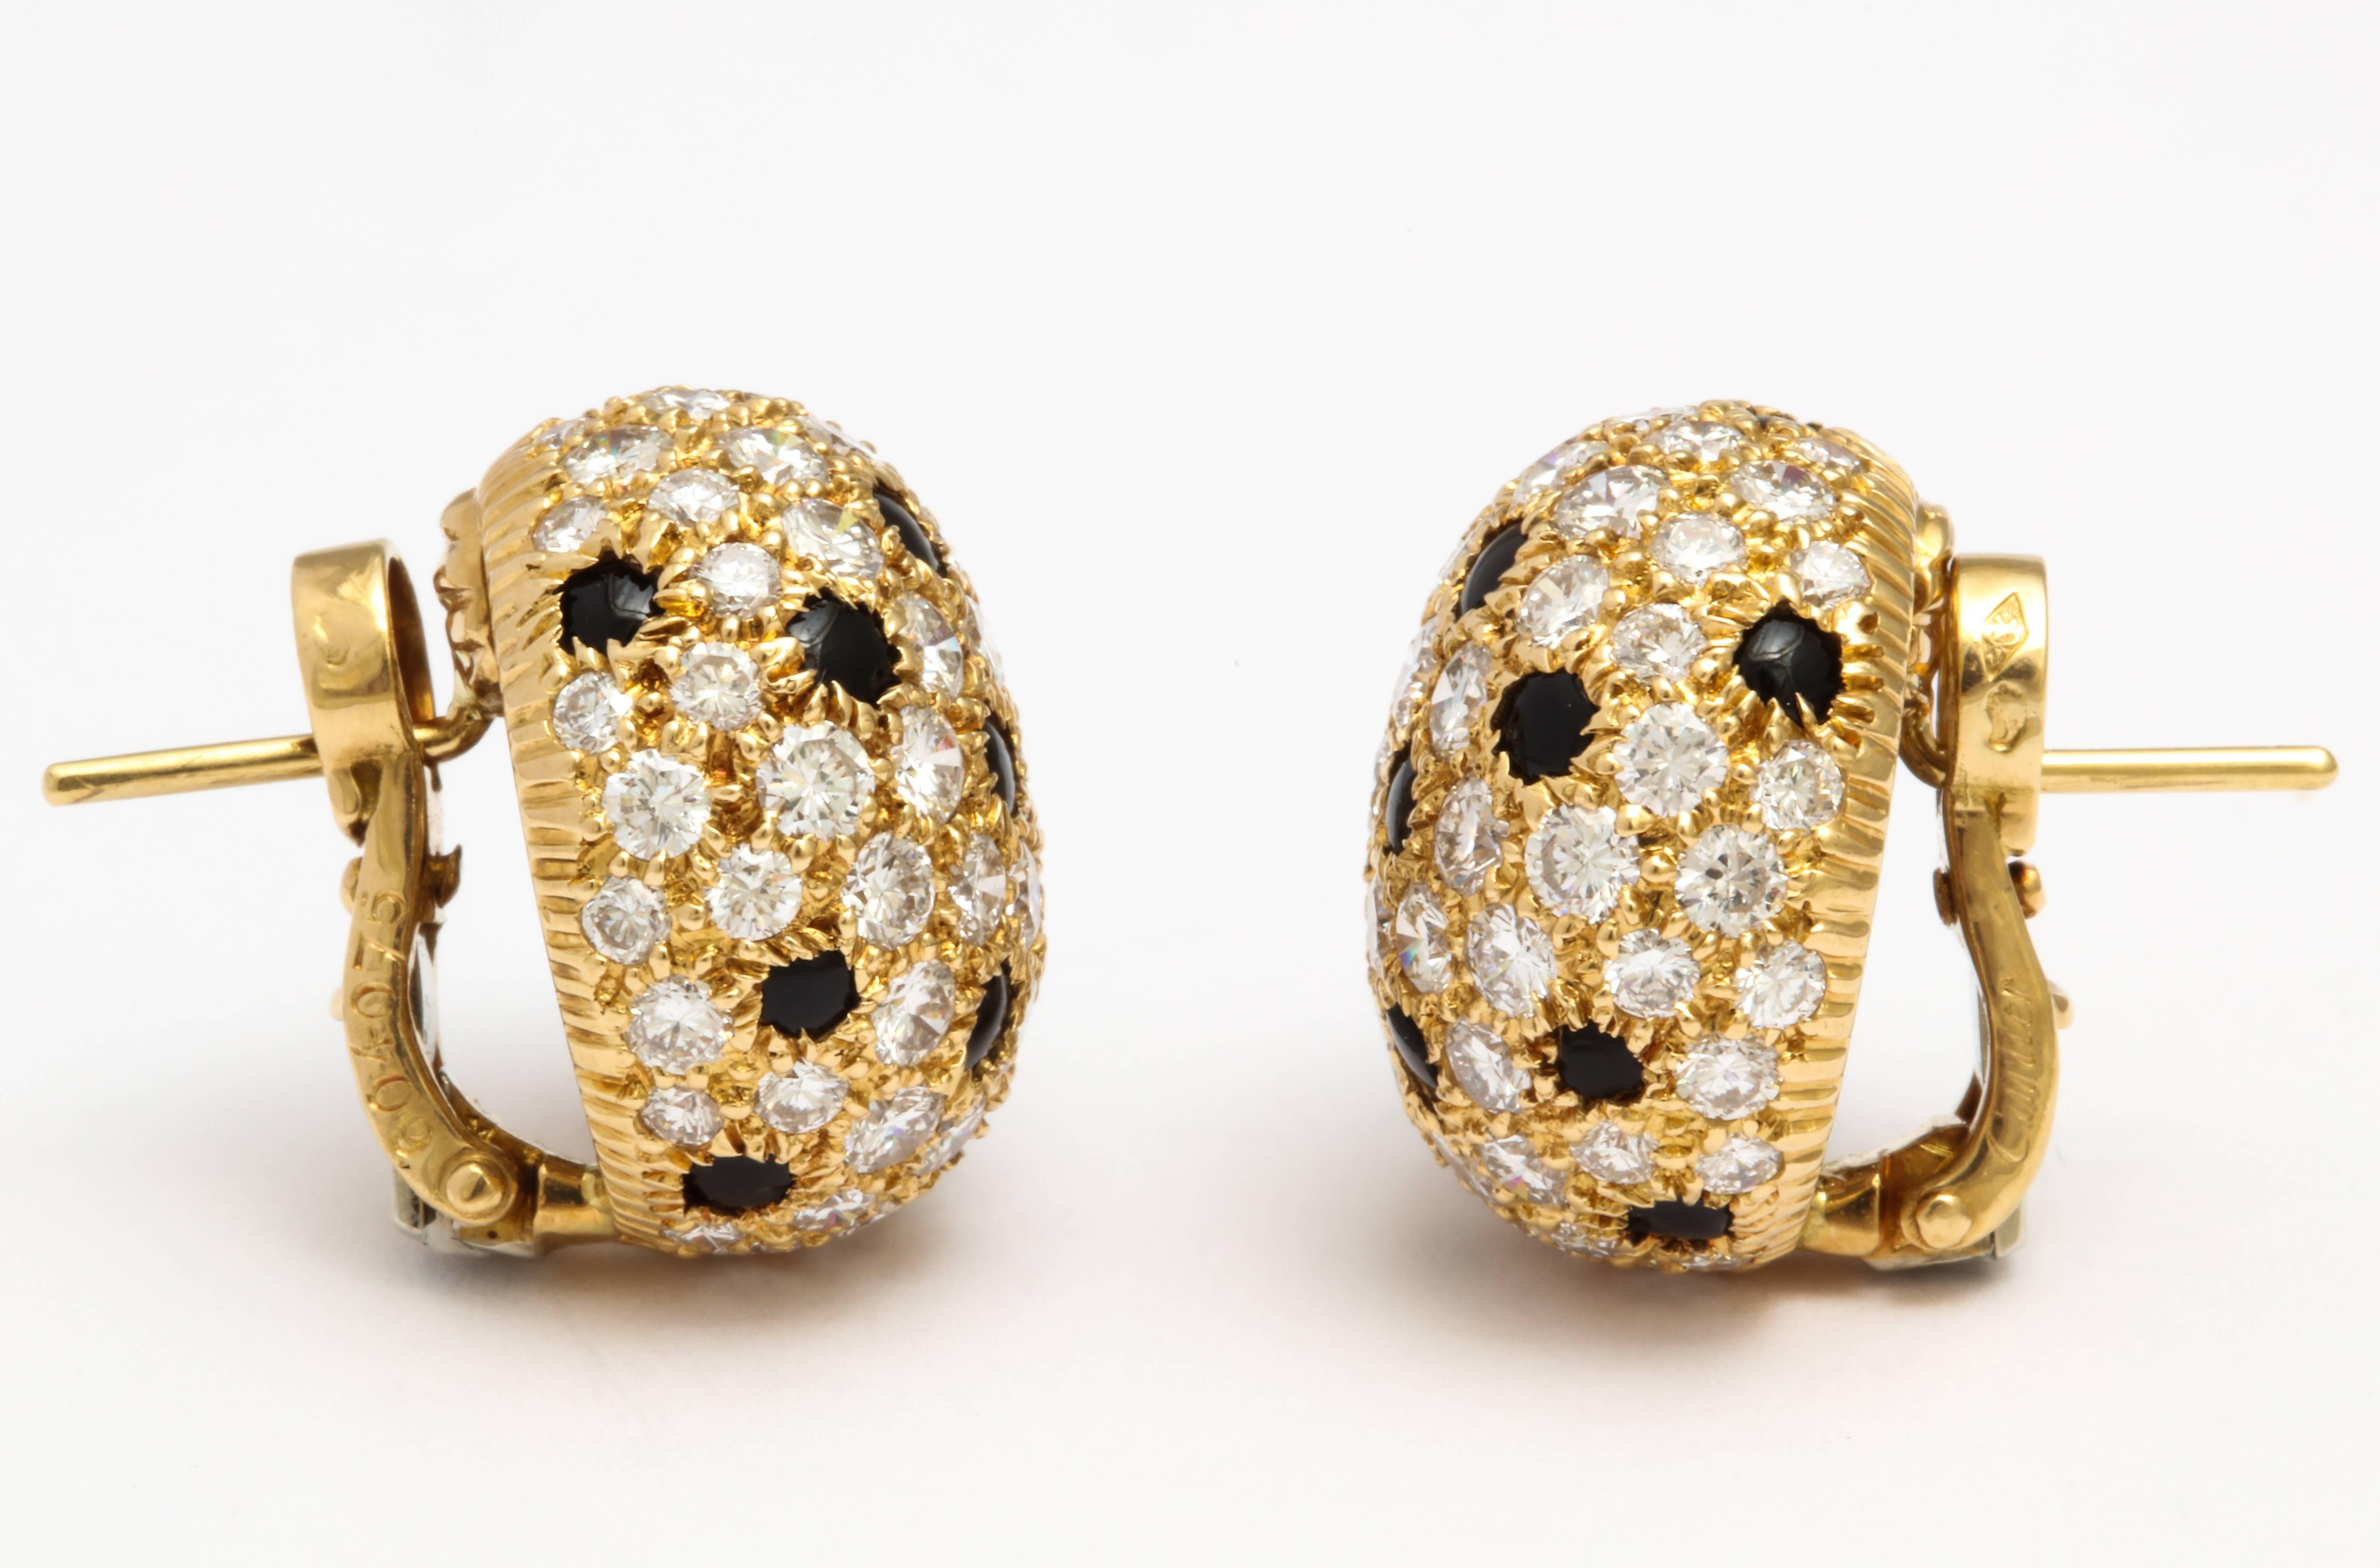 A pair of earrings by Cartier set in 18 karat yellow gold. Each bombé circular cluster has pavé-set brilliant-cut diamonds with a total weight of approximately 6 carats, and is interspersed by buff-top onyx spot details. French marks. Fabulous